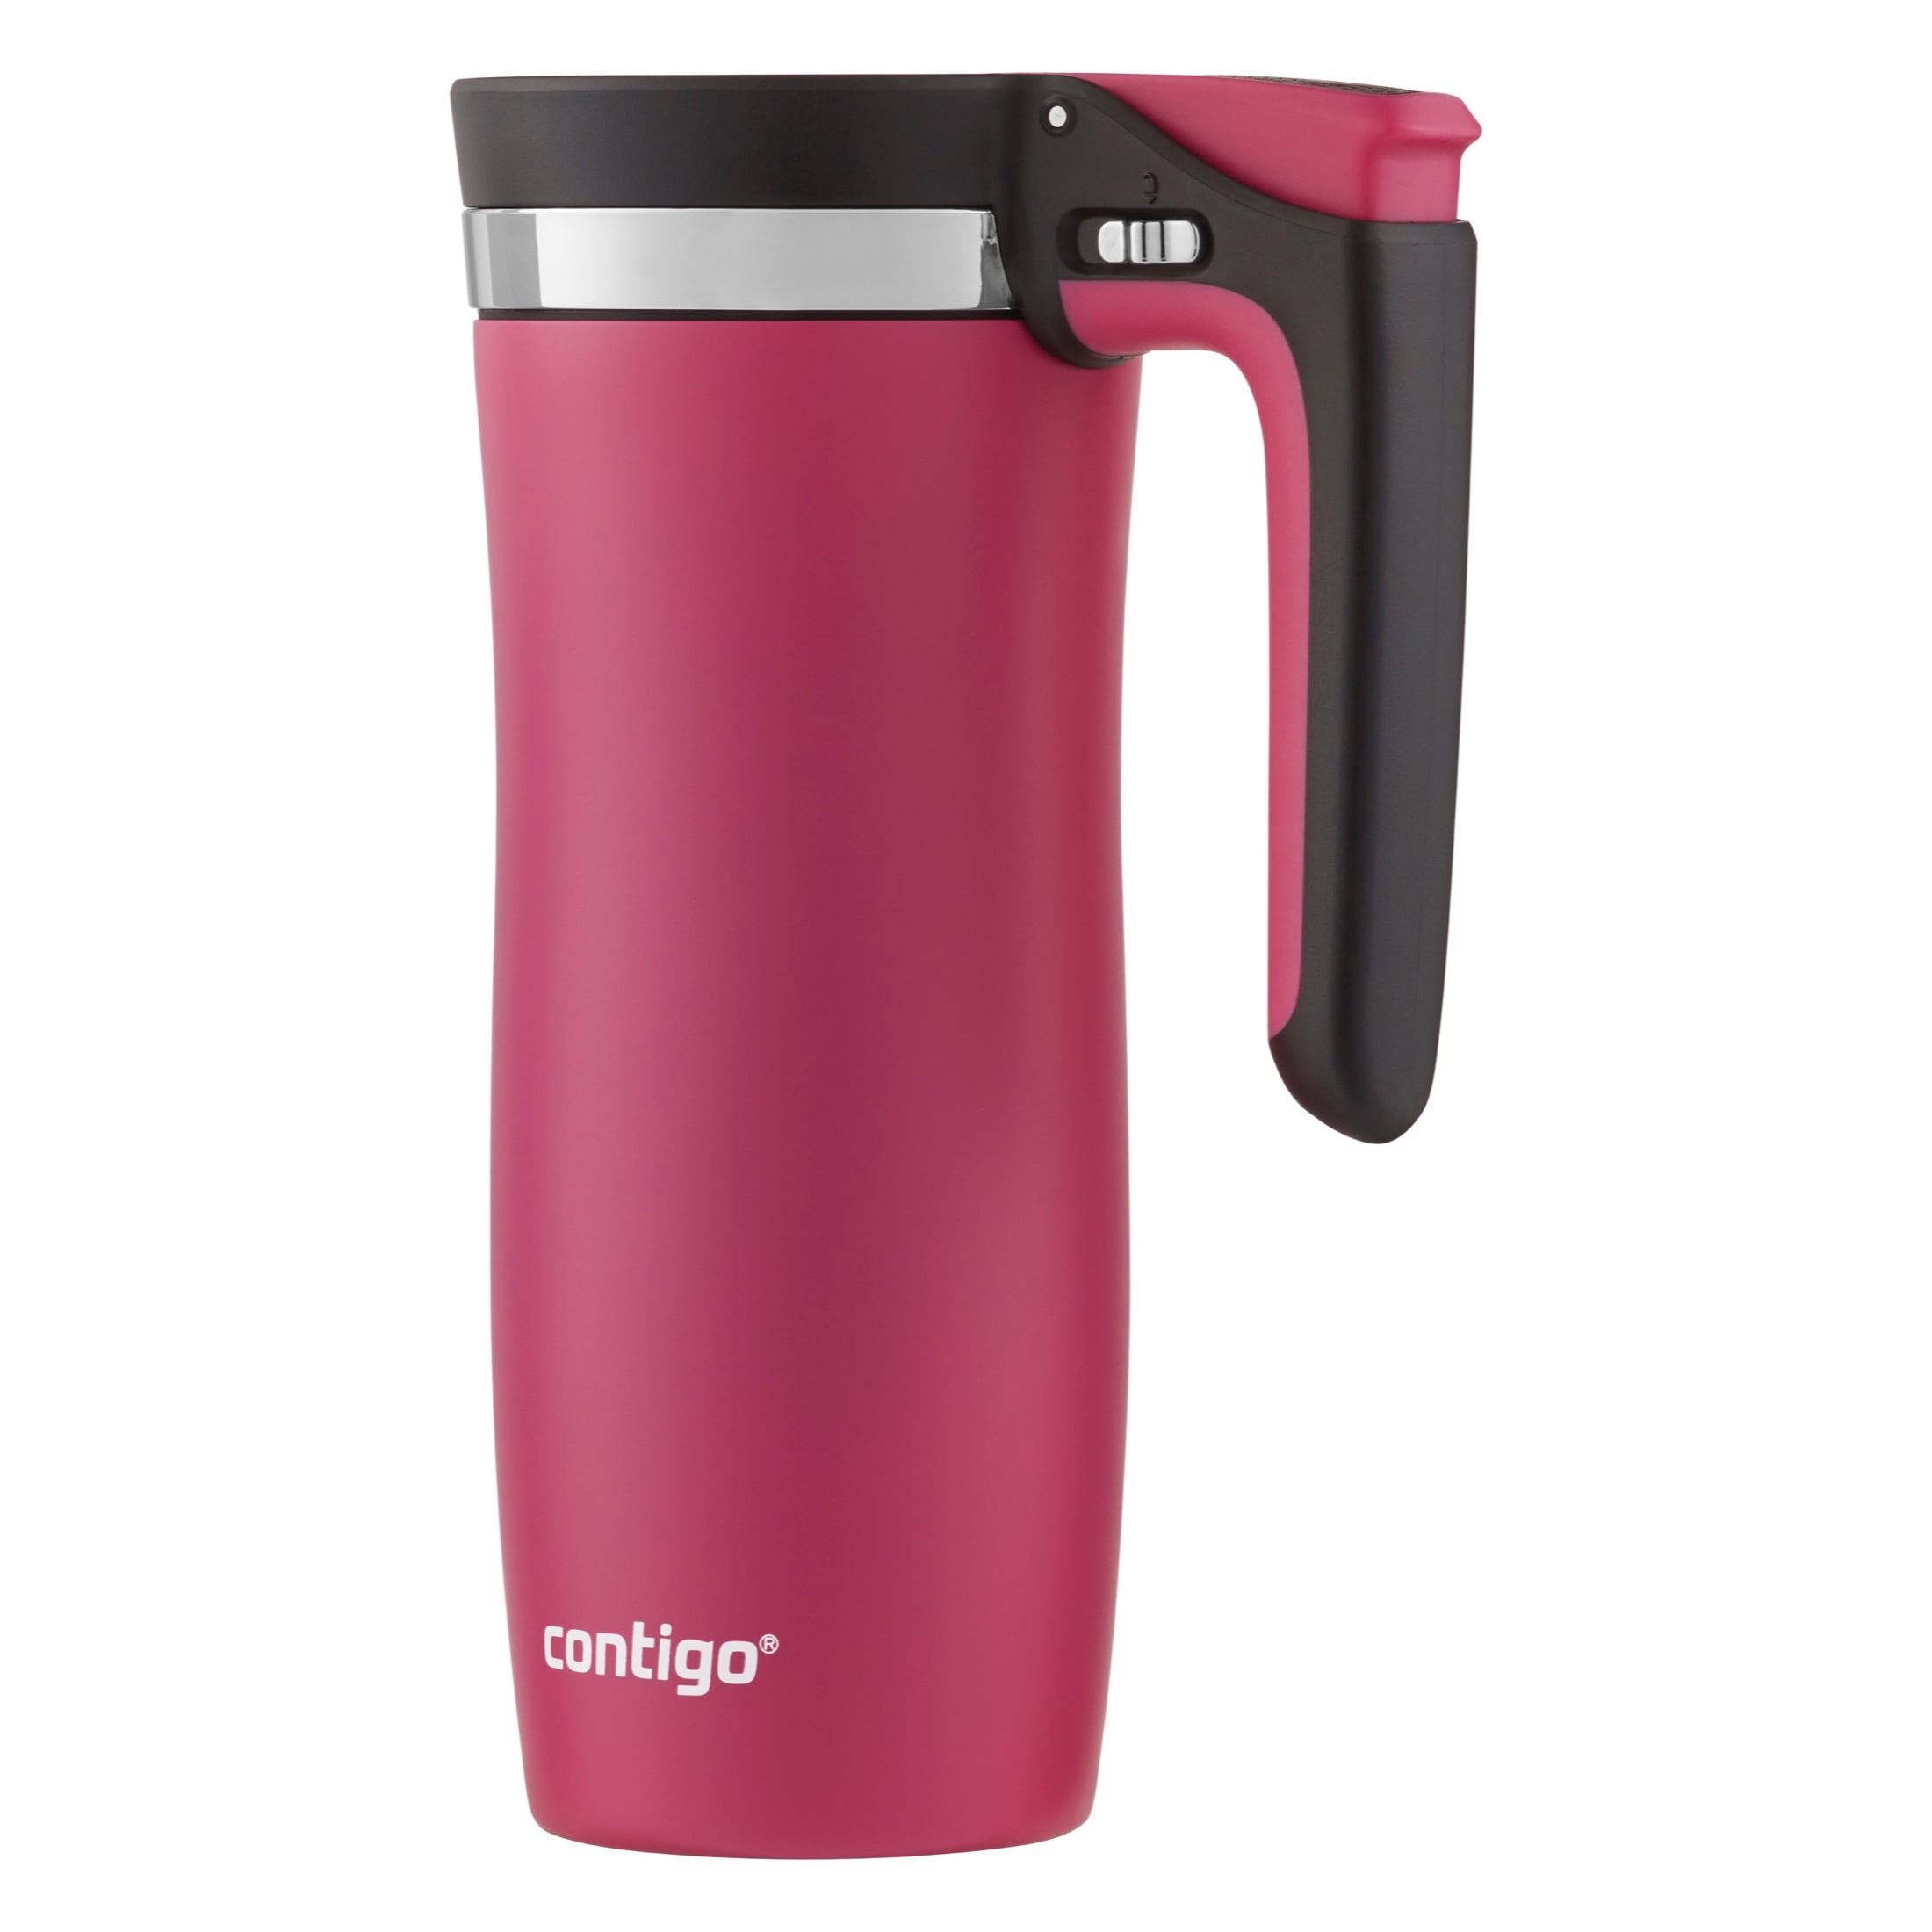 Contigo Stainless Steel Travel Mug with AUTOSEAL Lid and Handle Green, 16  fl oz. 